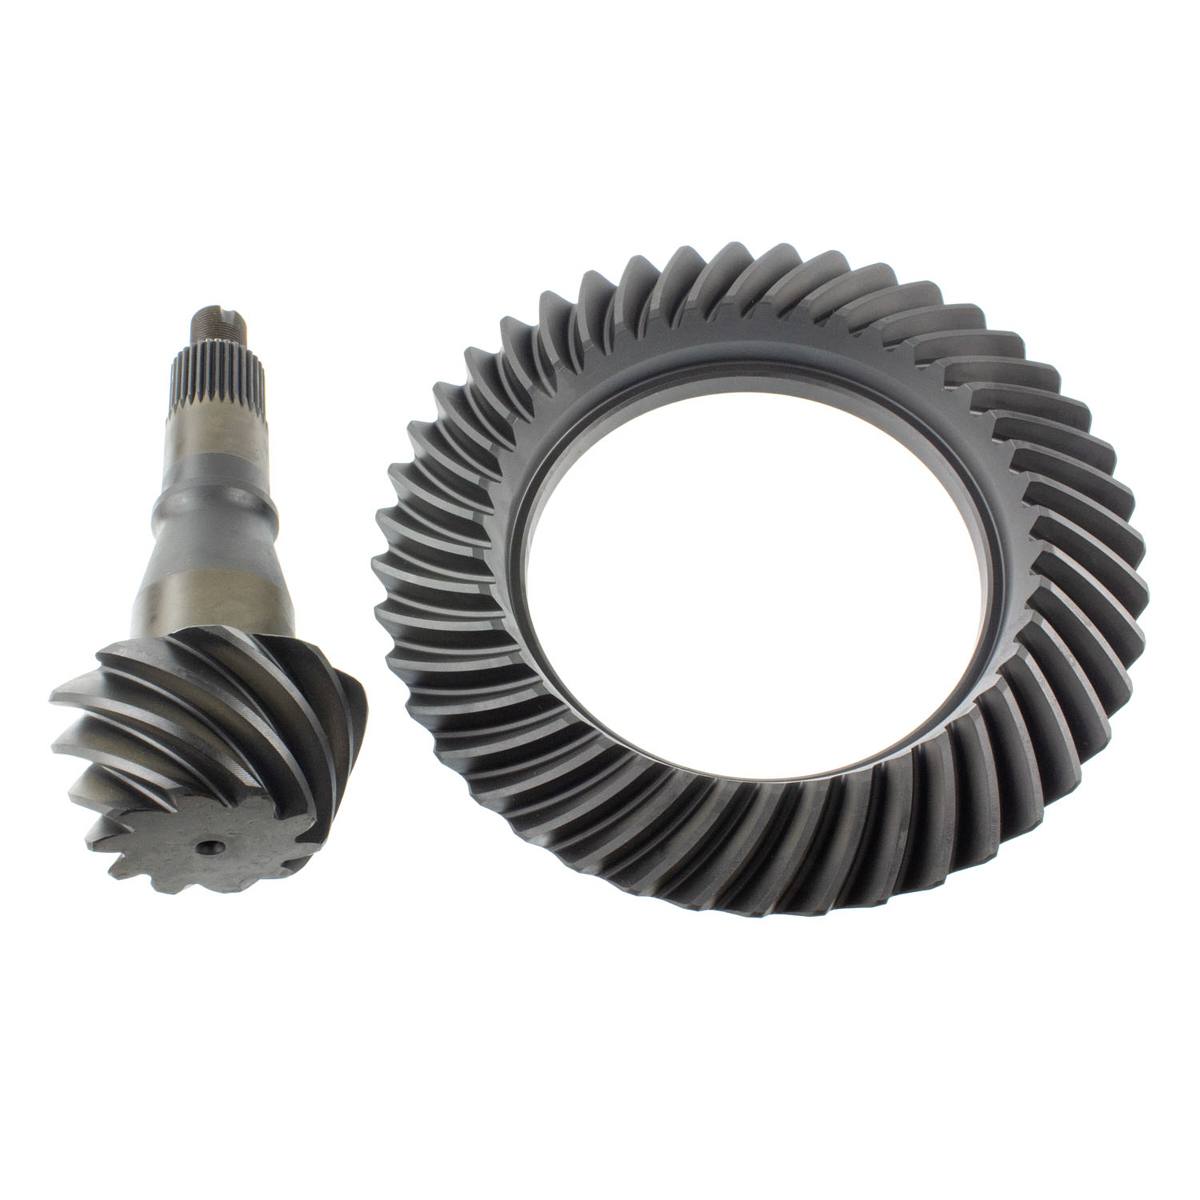 Motive Gear GM9.76-430 - Ring and Pinion, Performance, 4.30 Ratio, 32 Spline Pinion, 9.76 in, GM 12-Bolt, Kit